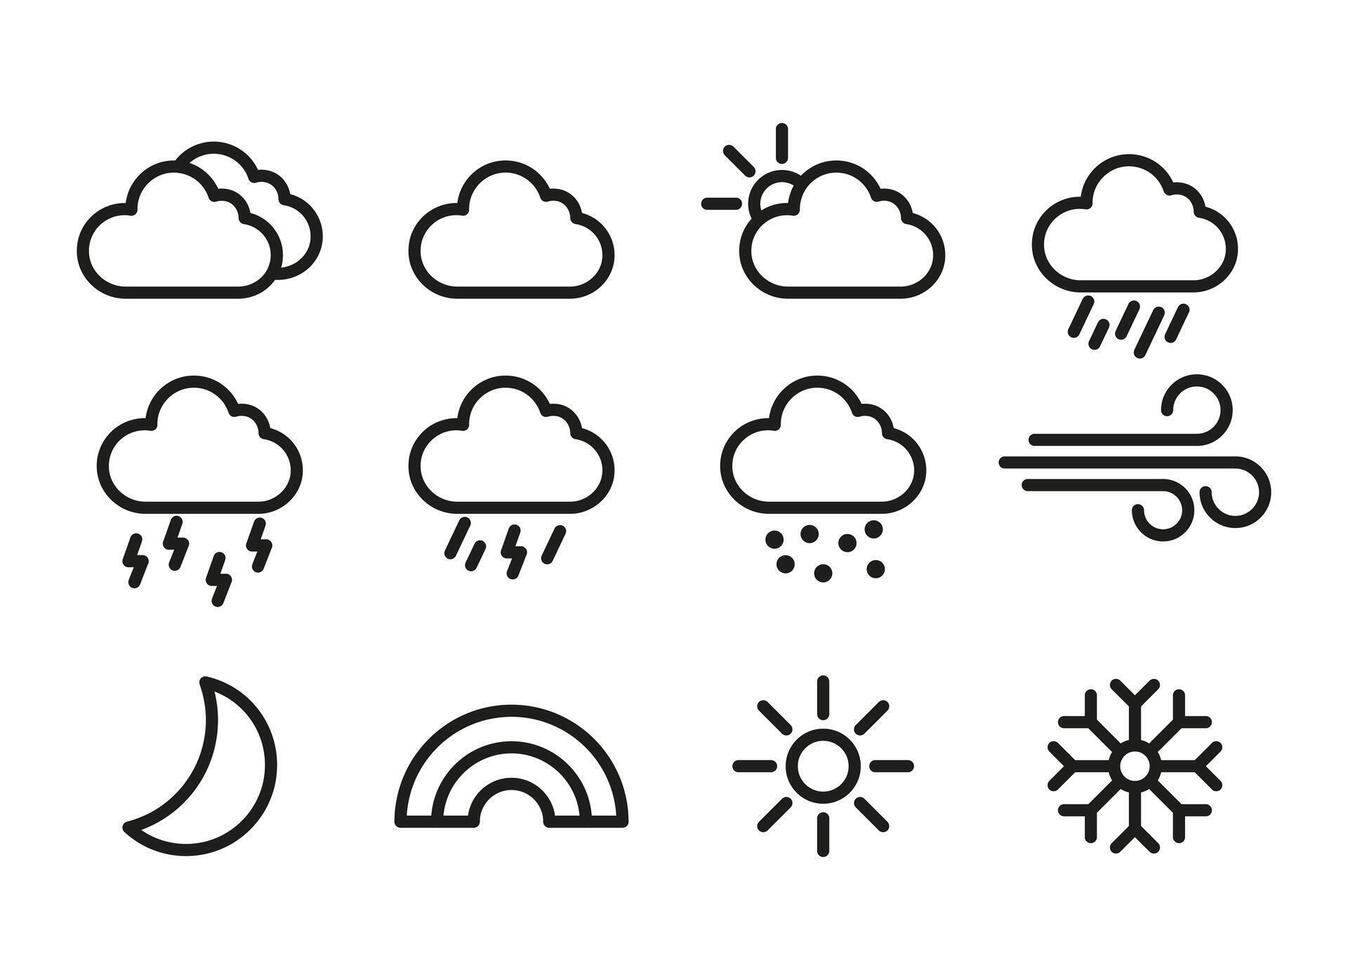 Explore a variety of weather-related vector illustrations capturing different atmospheric conditions and elements, including sunny days, cloudy skies, rain.